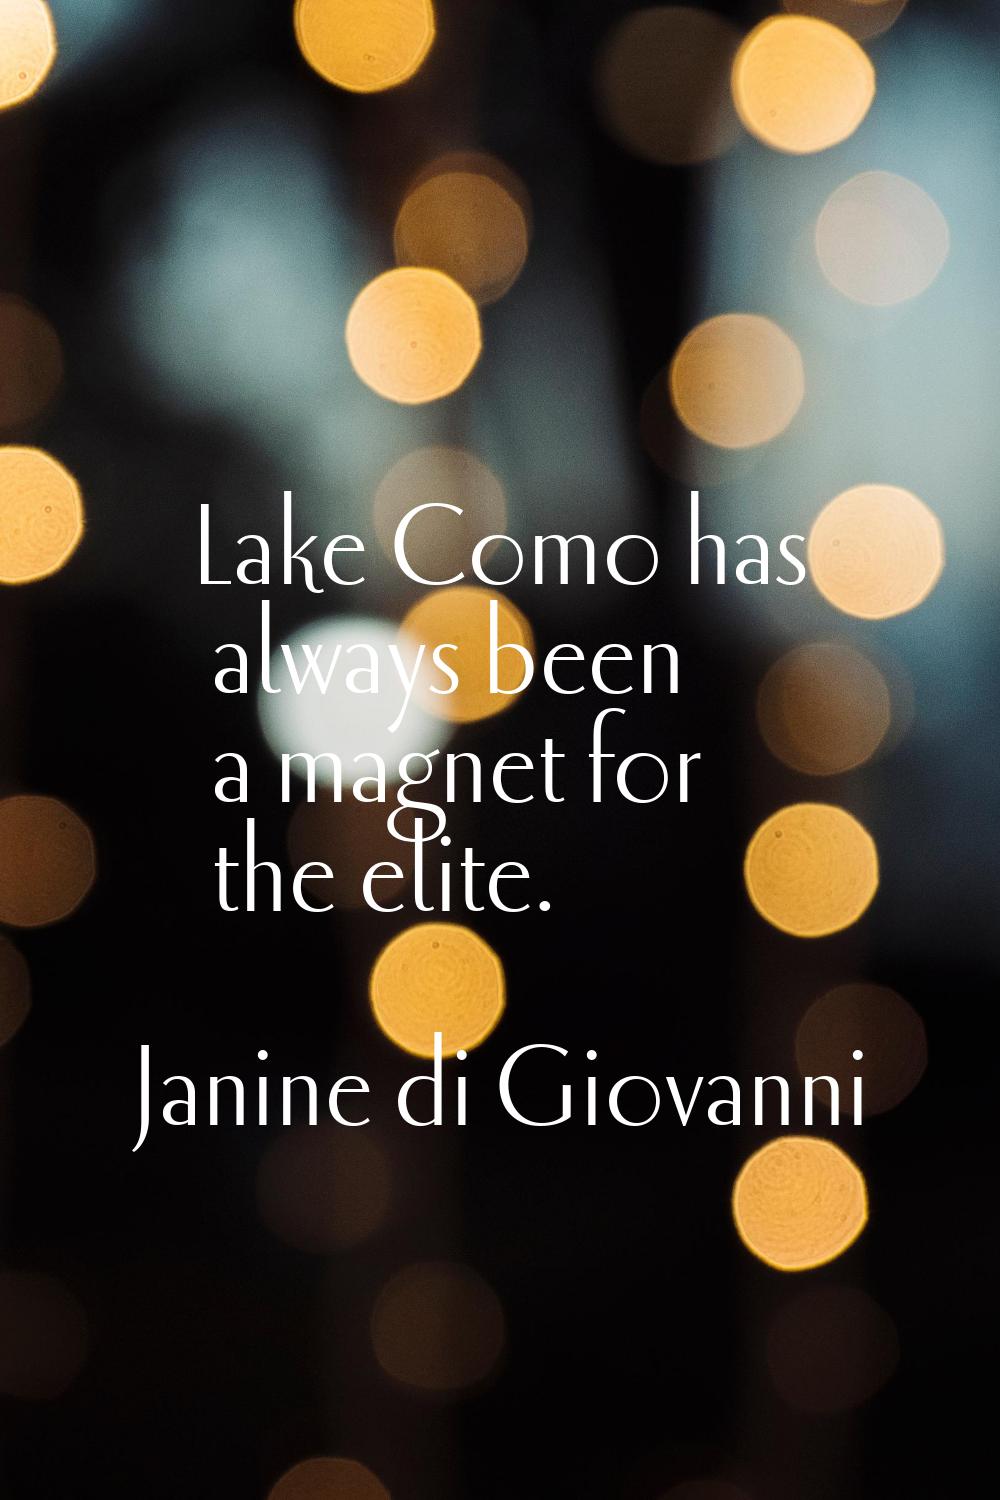 Lake Como has always been a magnet for the elite.